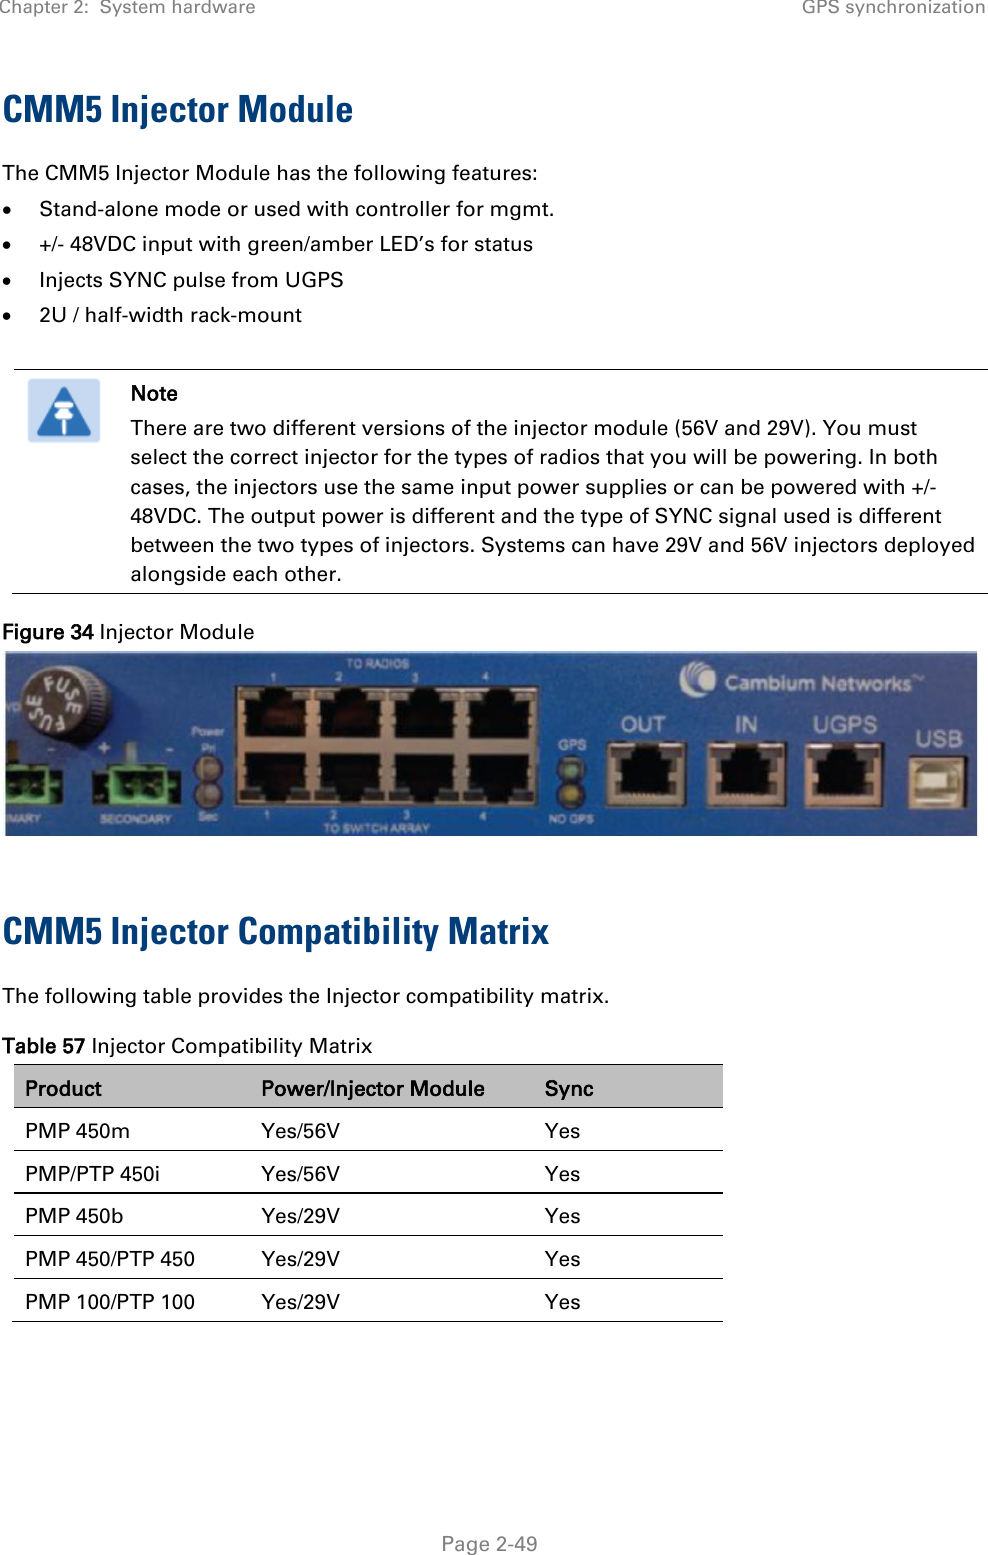 Chapter 2:  System hardware GPS synchronization   Page 2-49 CMM5 Injector Module The CMM5 Injector Module has the following features: • Stand-alone mode or used with controller for mgmt. • +/- 48VDC input with green/amber LED’s for status • Injects SYNC pulse from UGPS • 2U / half-width rack-mount   Note There are two different versions of the injector module (56V and 29V). You must select the correct injector for the types of radios that you will be powering. In both cases, the injectors use the same input power supplies or can be powered with +/- 48VDC. The output power is different and the type of SYNC signal used is different between the two types of injectors. Systems can have 29V and 56V injectors deployed alongside each other. Figure 34 Injector Module   CMM5 Injector Compatibility Matrix The following table provides the Injector compatibility matrix. Table 57 Injector Compatibility Matrix Product Power/Injector Module Sync PMP 450m Yes/56V Yes PMP/PTP 450i Yes/56V Yes PMP 450b  Yes/29V  Yes PMP 450/PTP 450 Yes/29V Yes PMP 100/PTP 100 Yes/29V Yes  